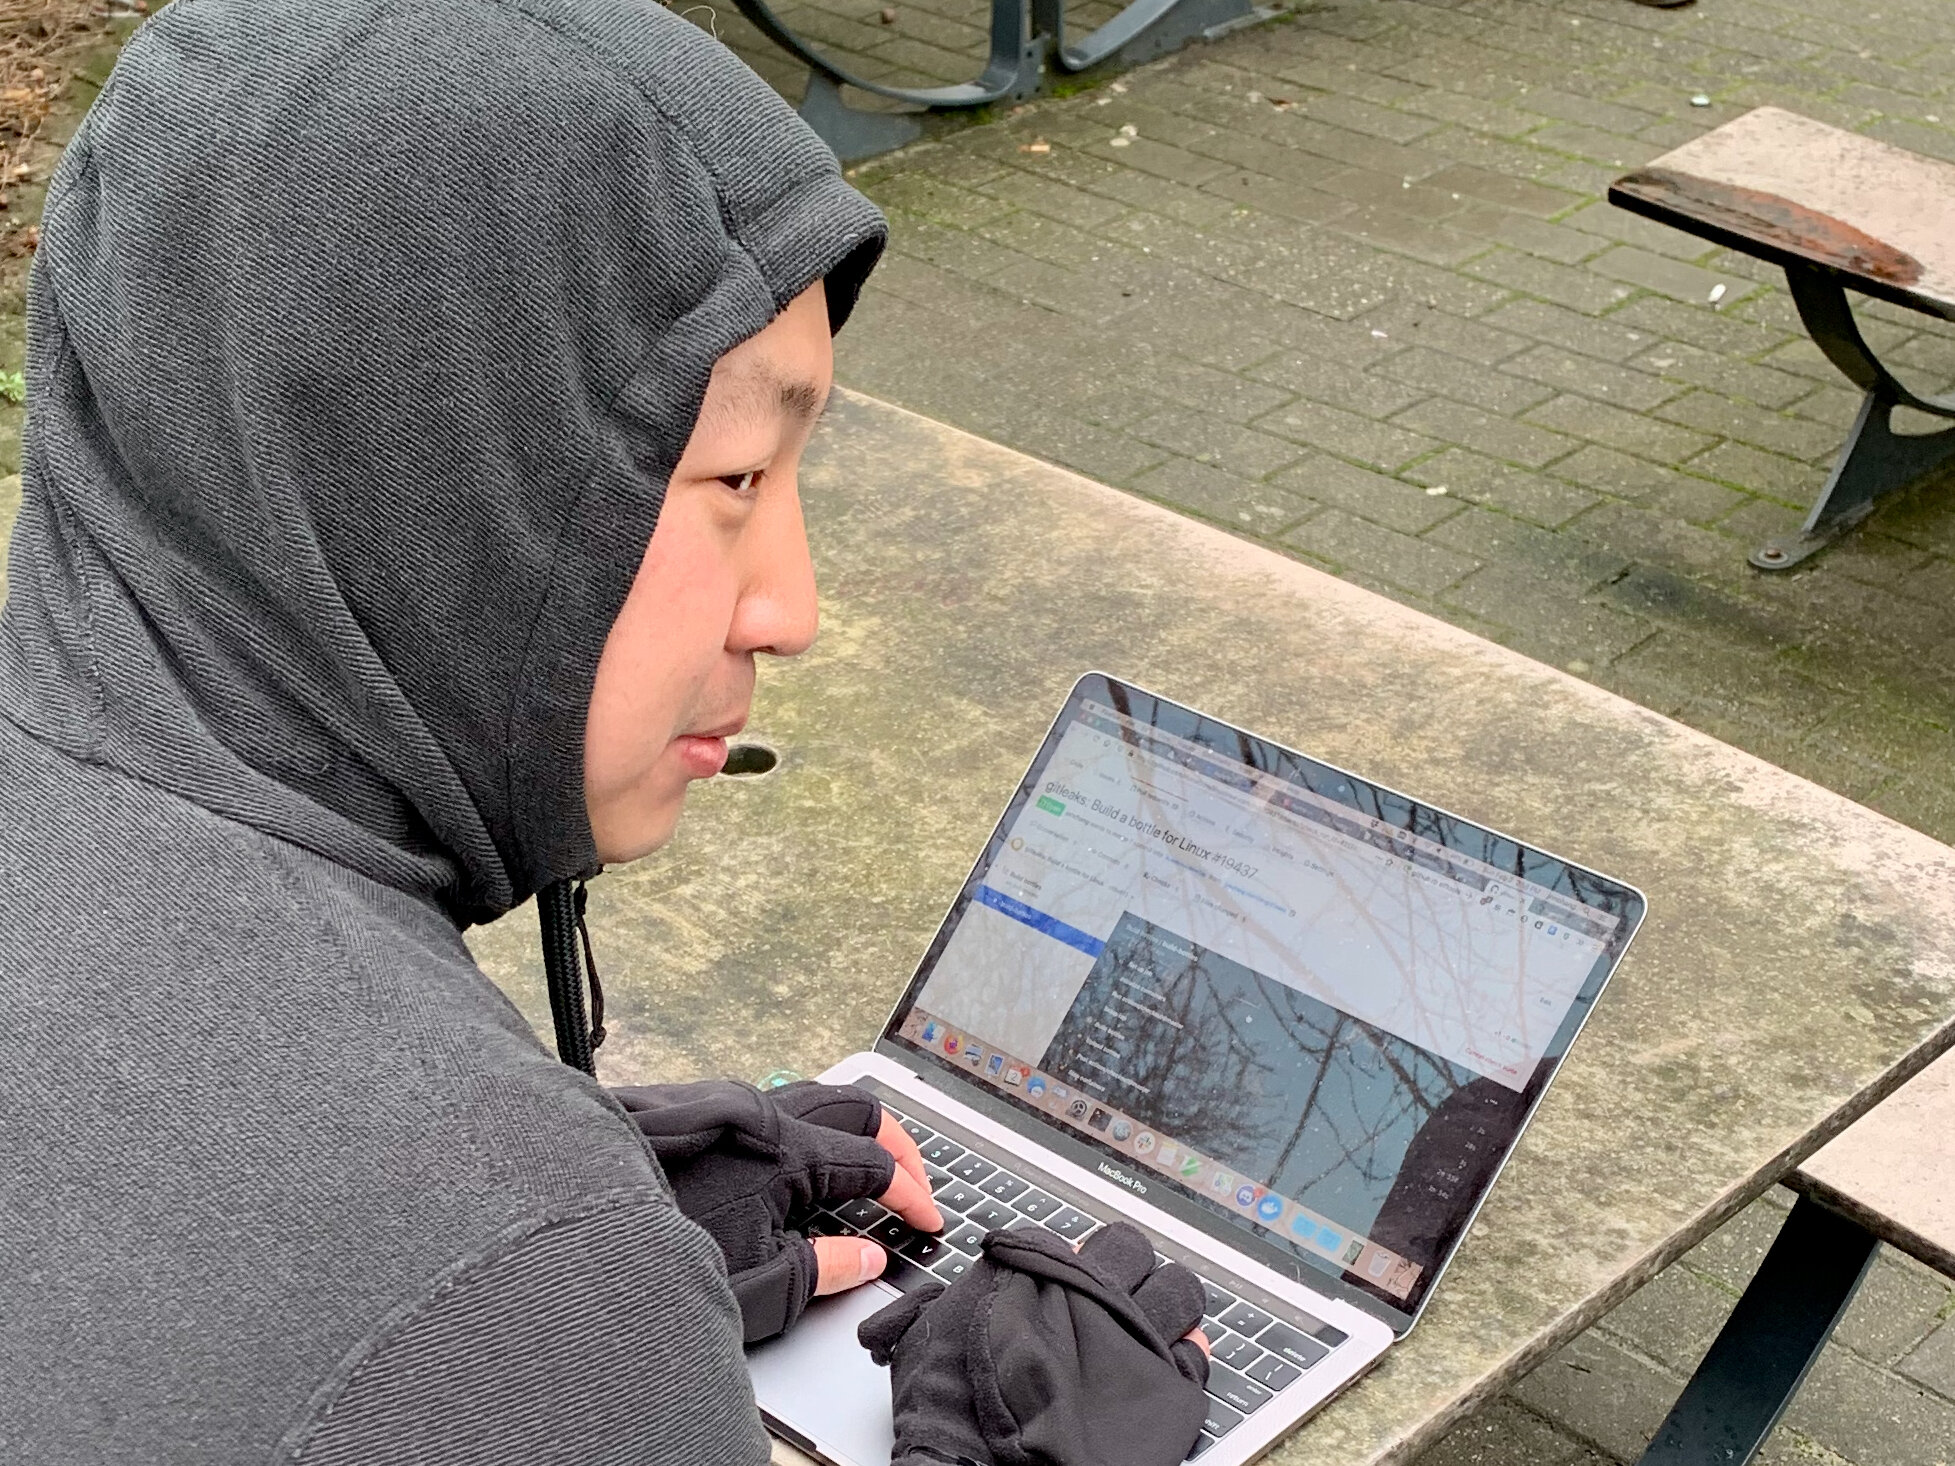 Jonathan hacking on continuous integration on his laptop outdoors in the cold.